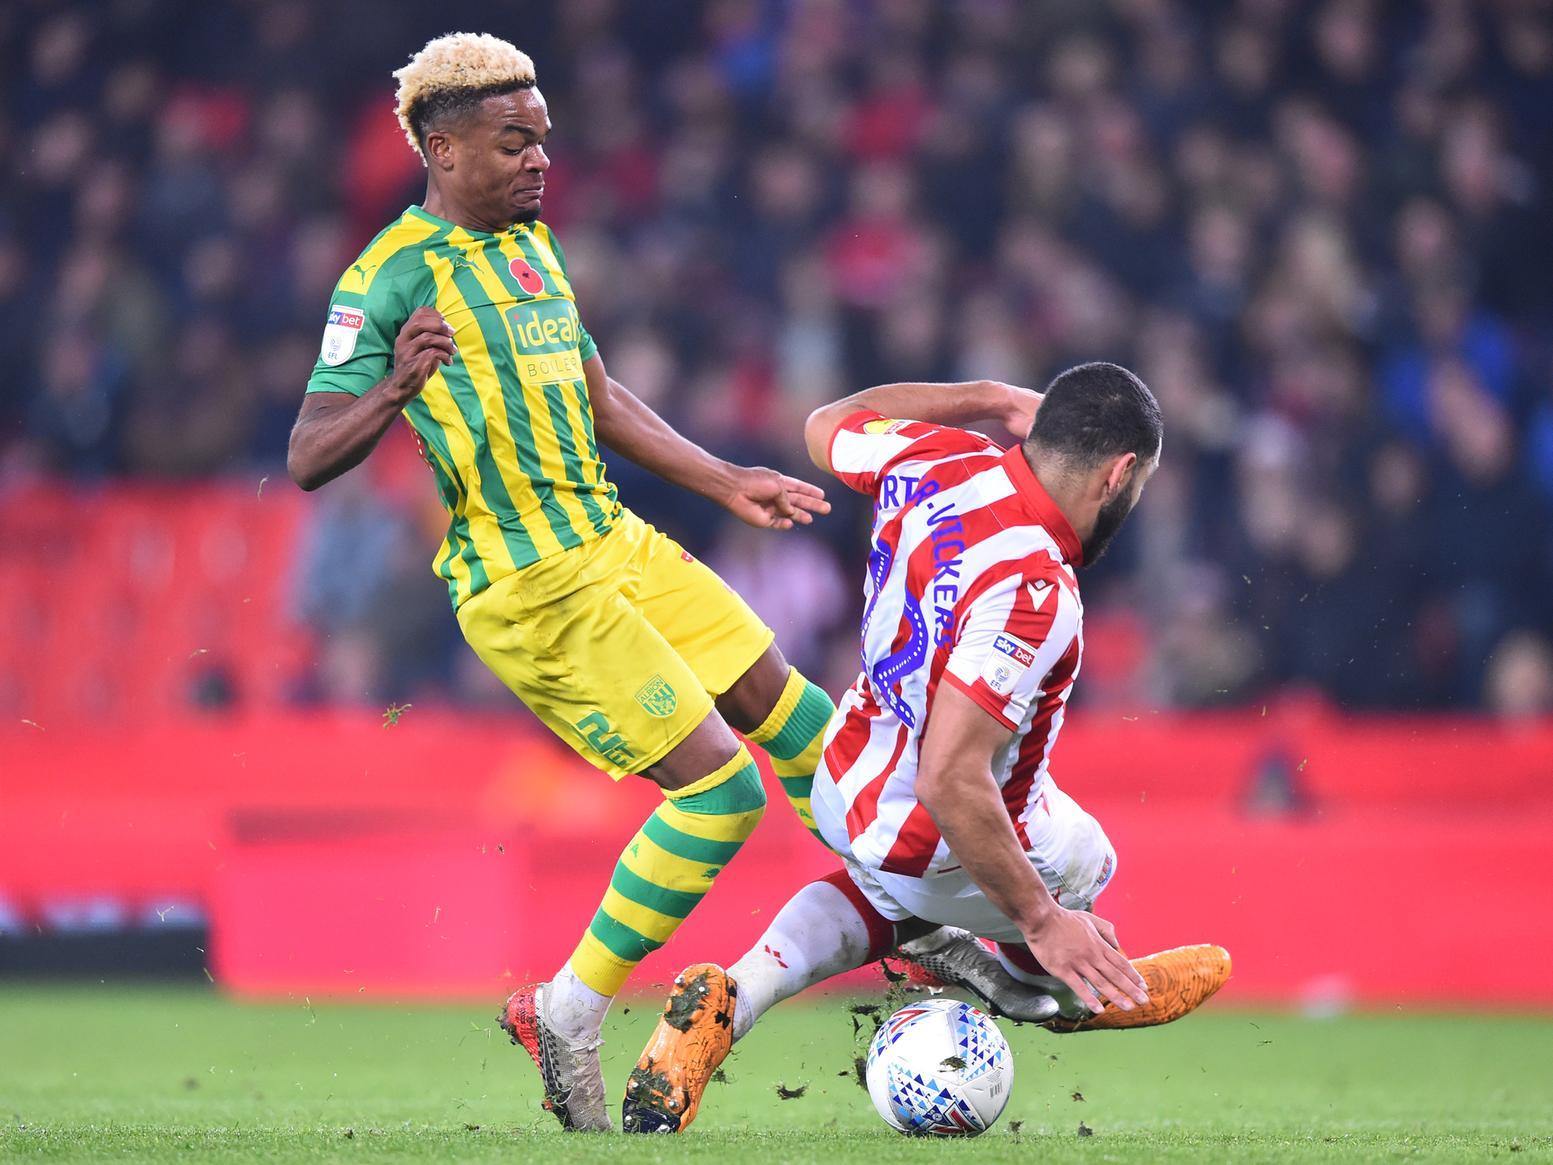 West Bromwich Albion have been handed a huge boost with on-loan West Ham United star Grady Diangana set to stay at The Hawthorns until the end of the season. (Various)